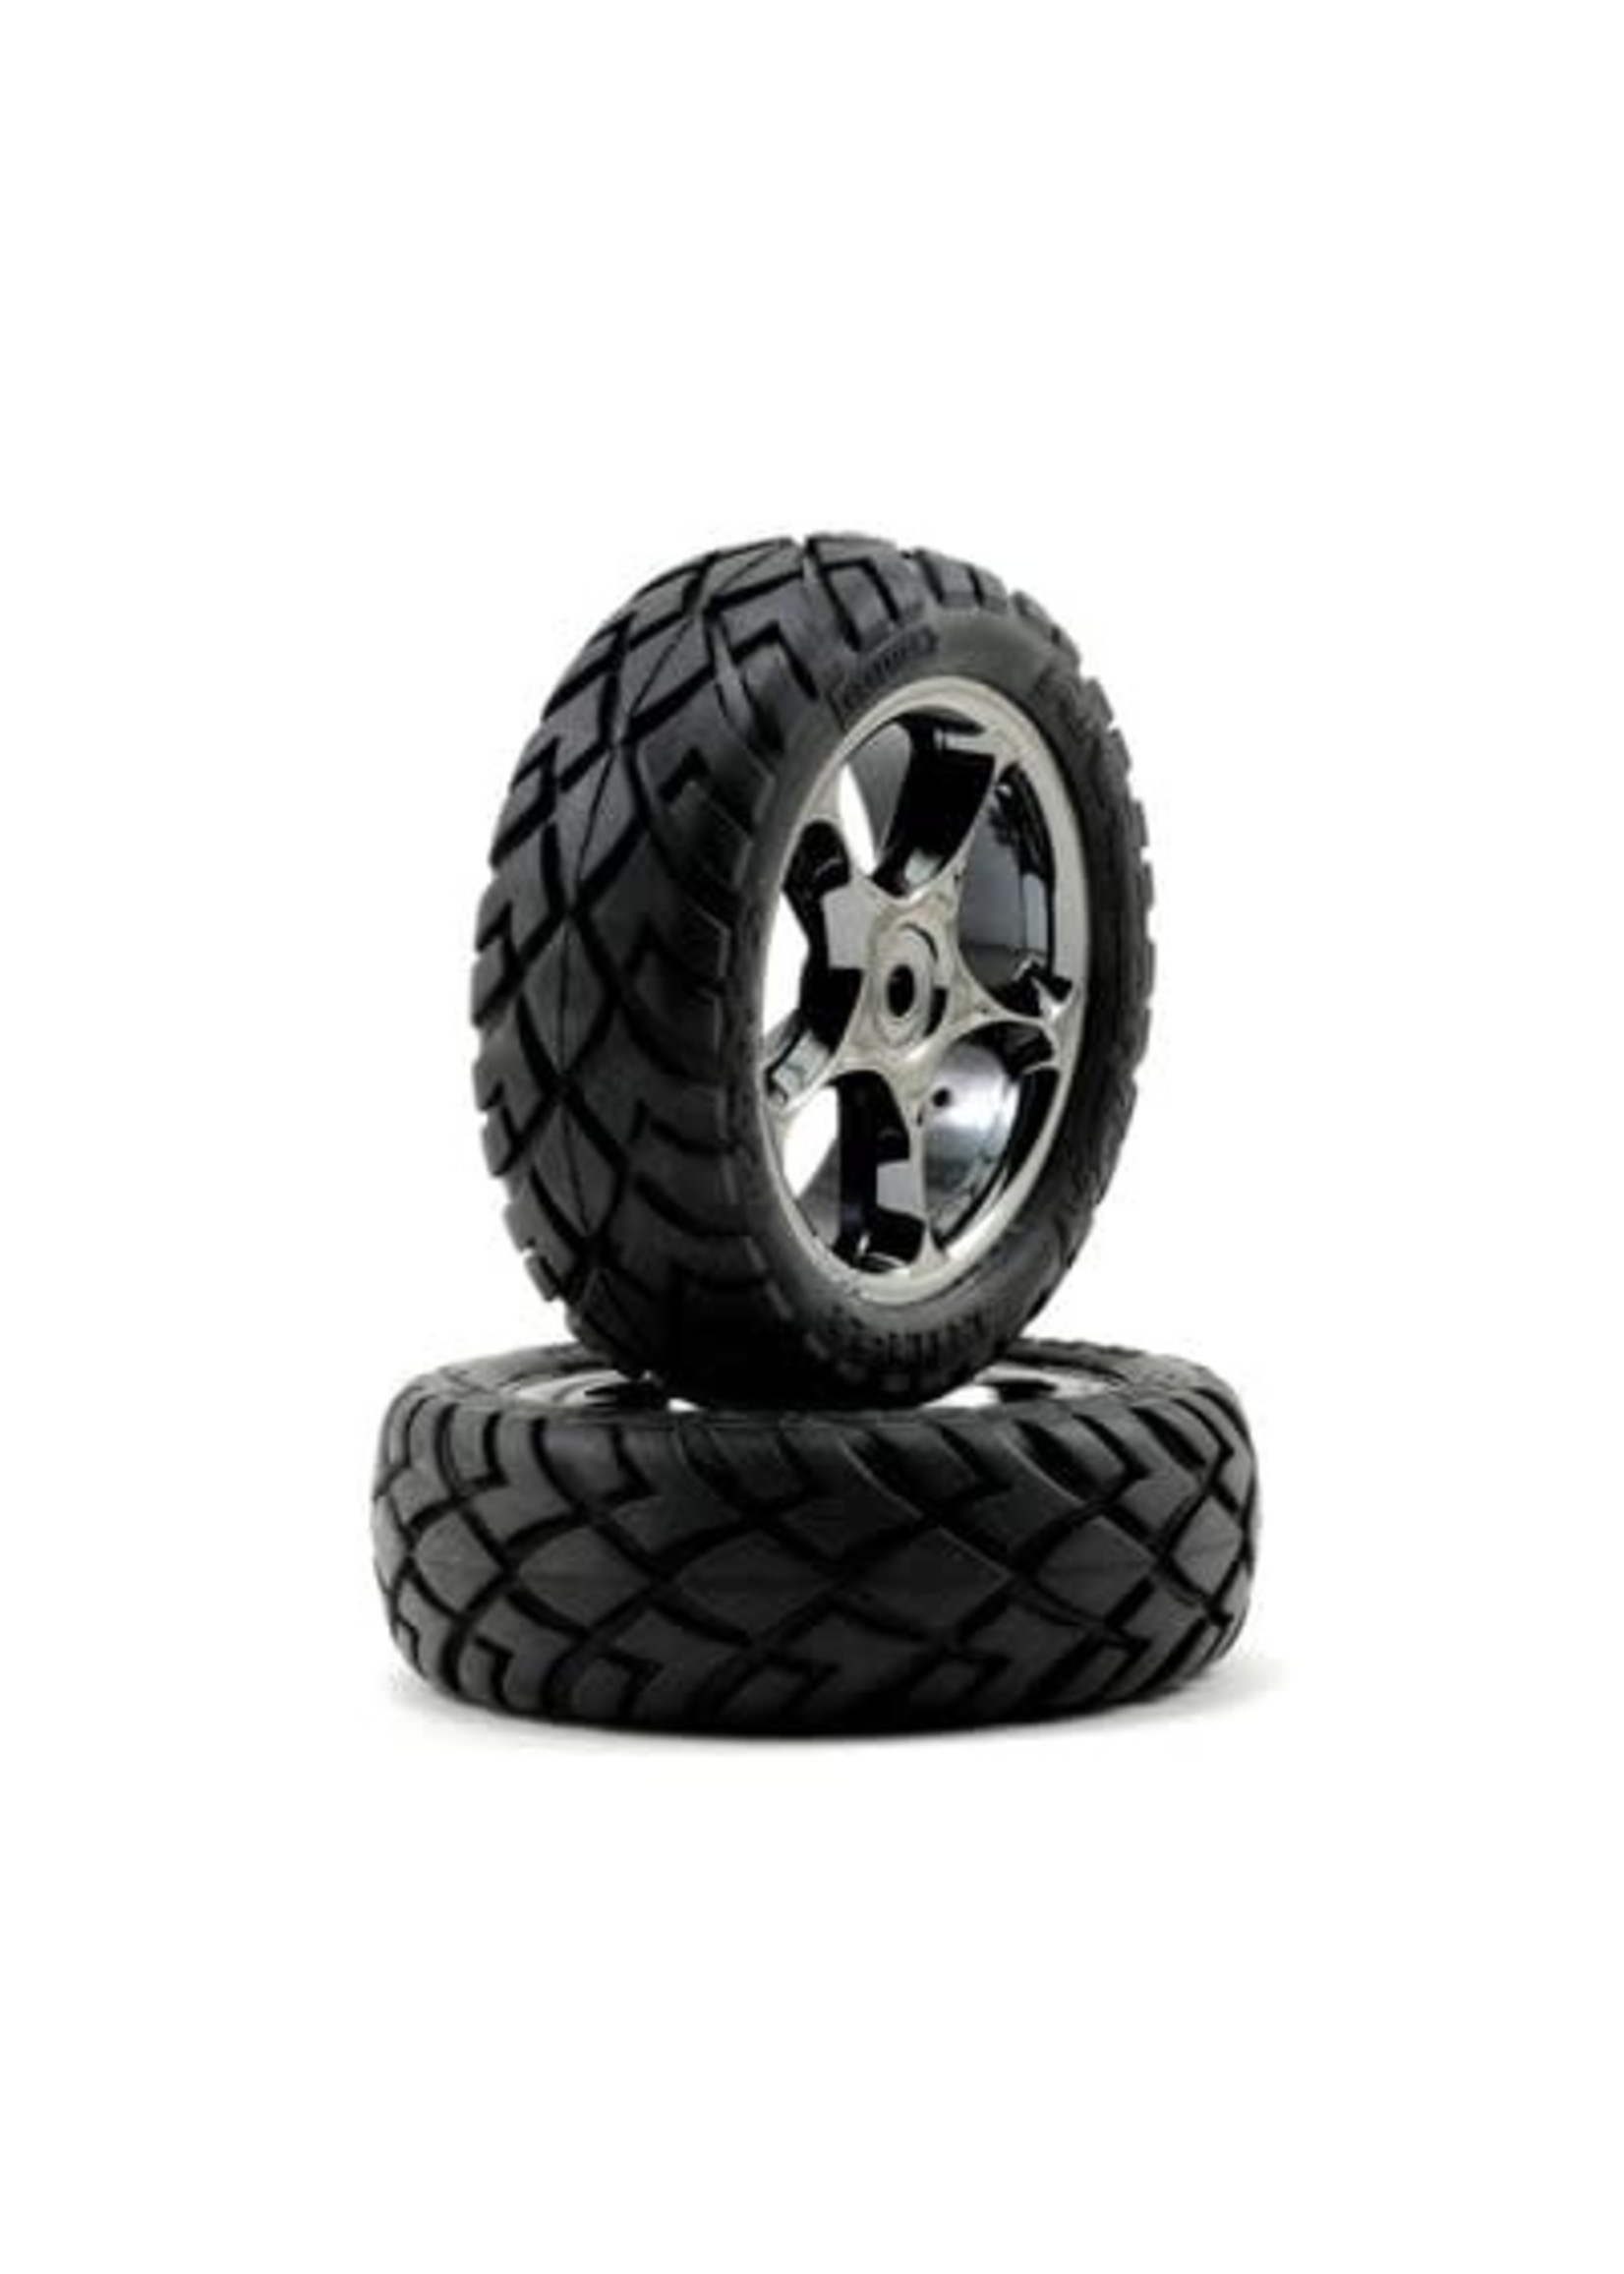 Traxxas 2479A Tires & wheels, assembled (Tracer 2.2' black chrome wheels, Anaconda 2.2' tires with foam inserts) (2) (Bandit front)